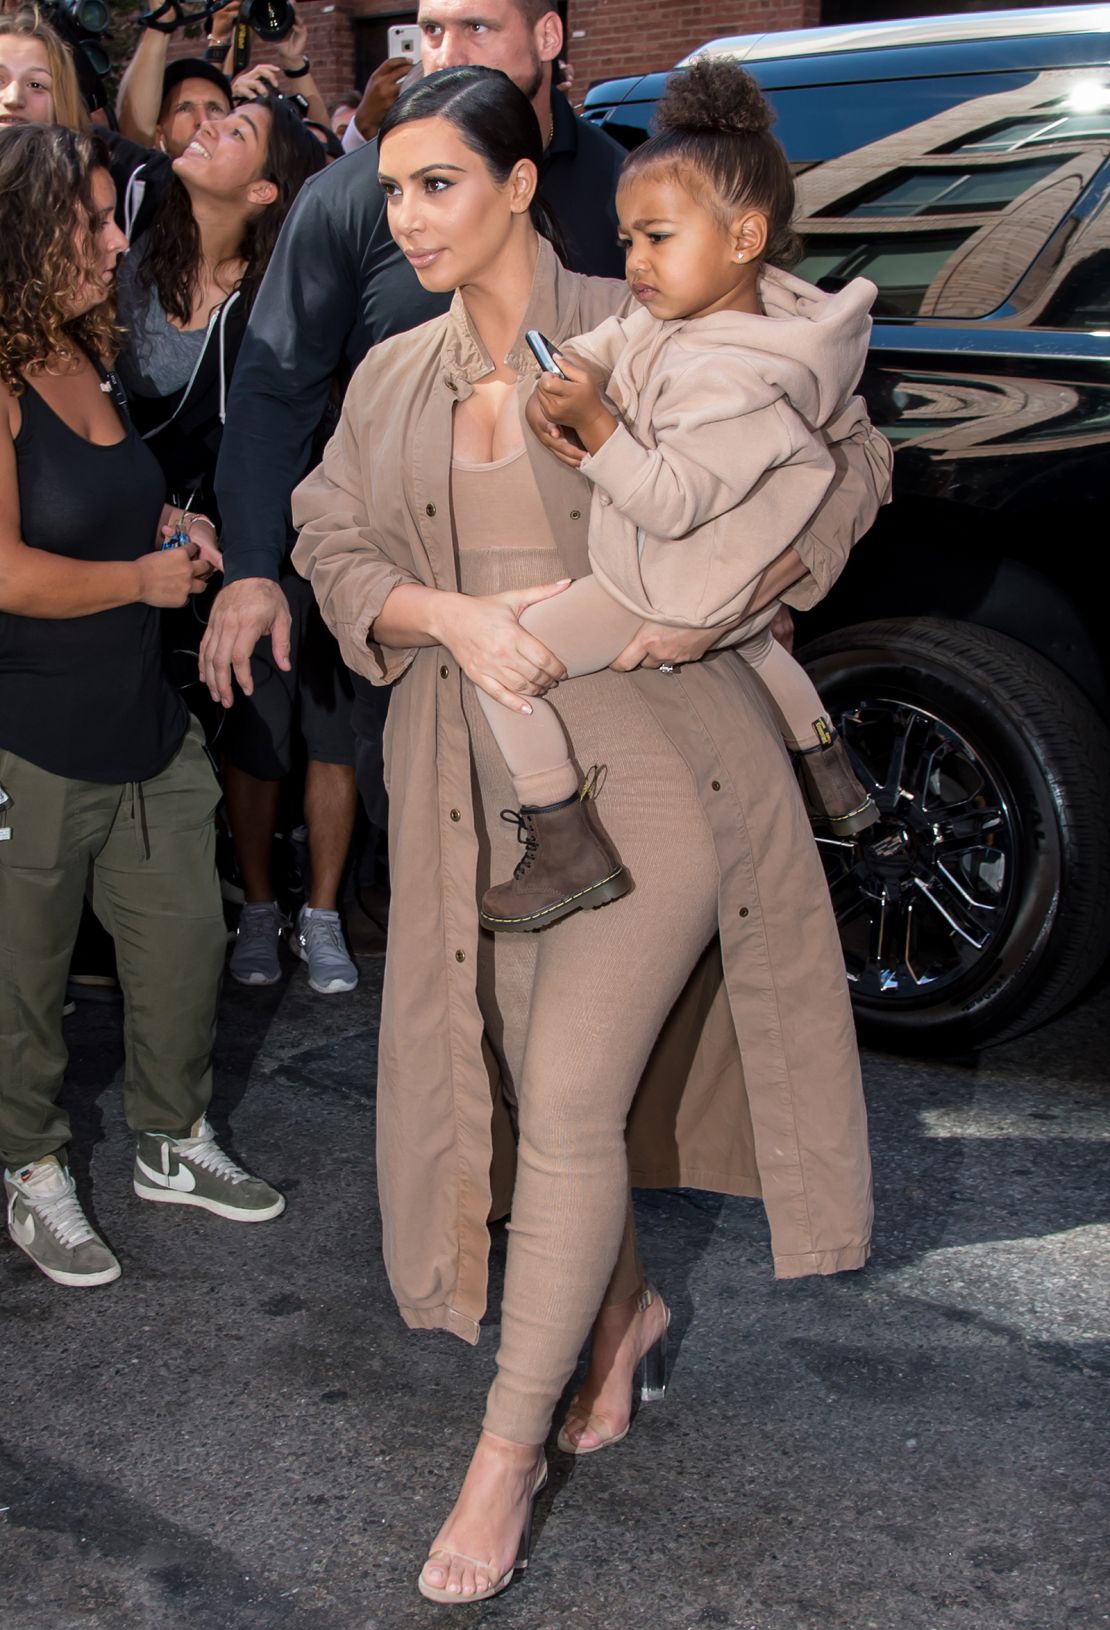 Kim Kardashian West in the Jogging Pant and Bodysuit for Fashion Week